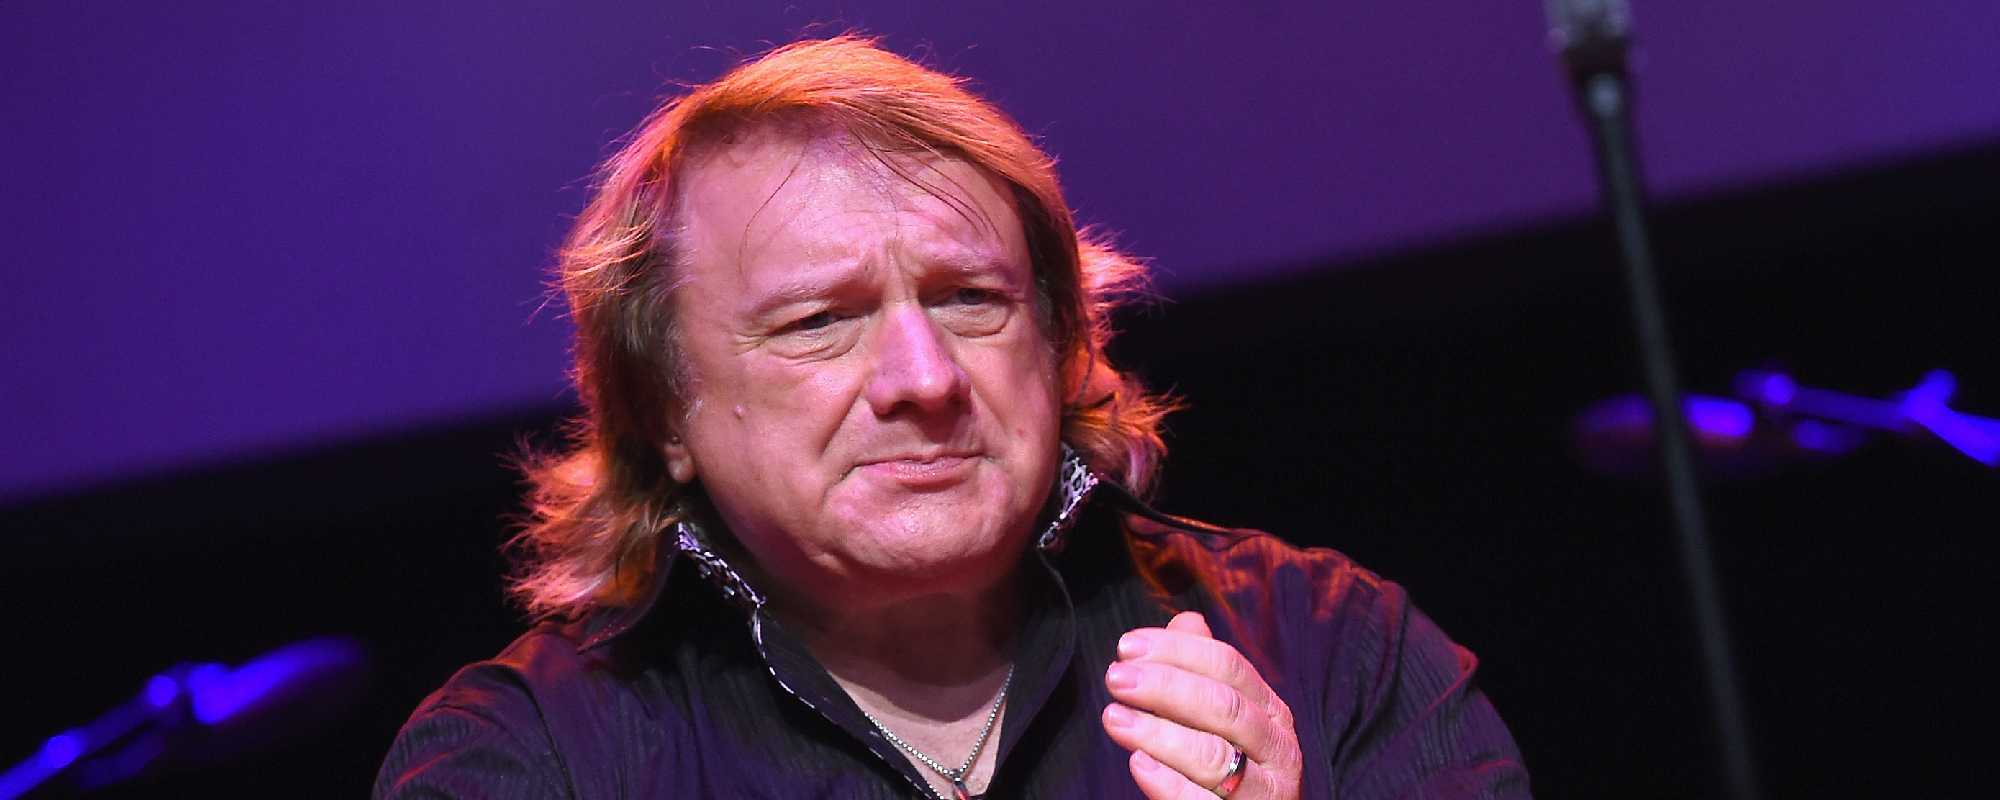 Lou Gramm Retiring From Performing: ”I’ve Been Putting It Off”